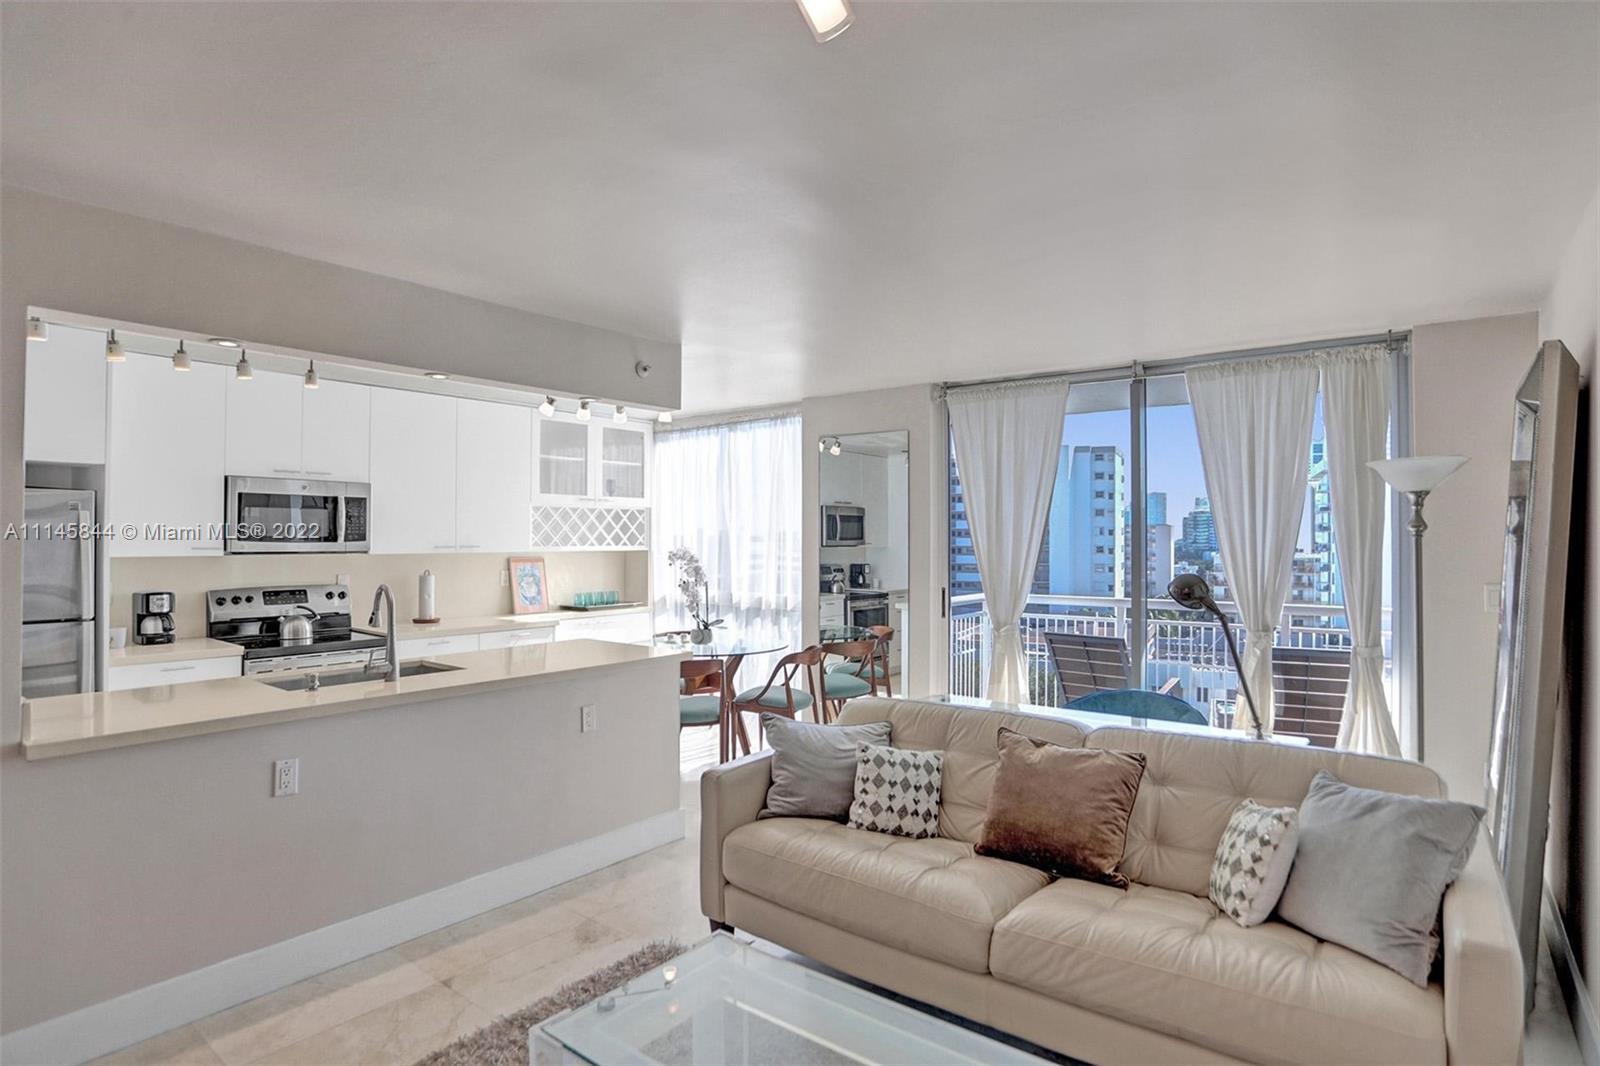 Fabulous one bedroom, two full bath condo on best street in South Beach.
TWO assigned parking space